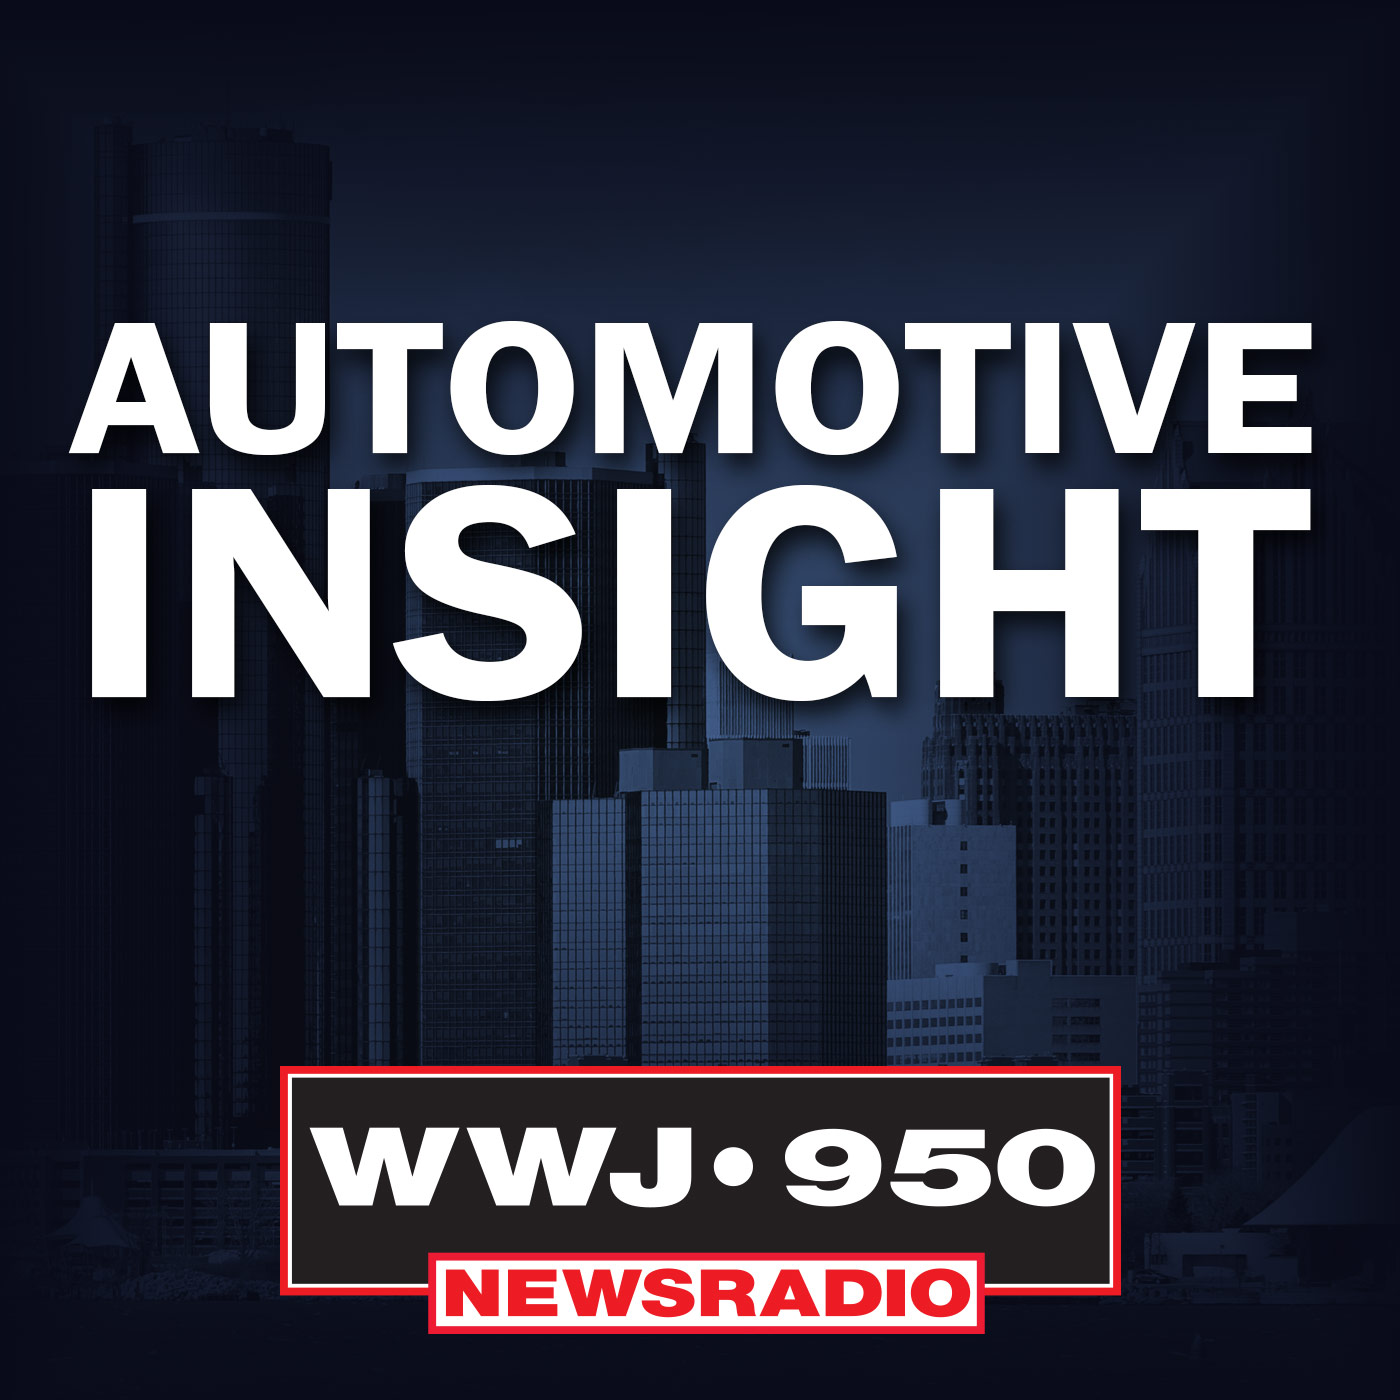 Automotive Insight: Automotive product planners turn to the Great One